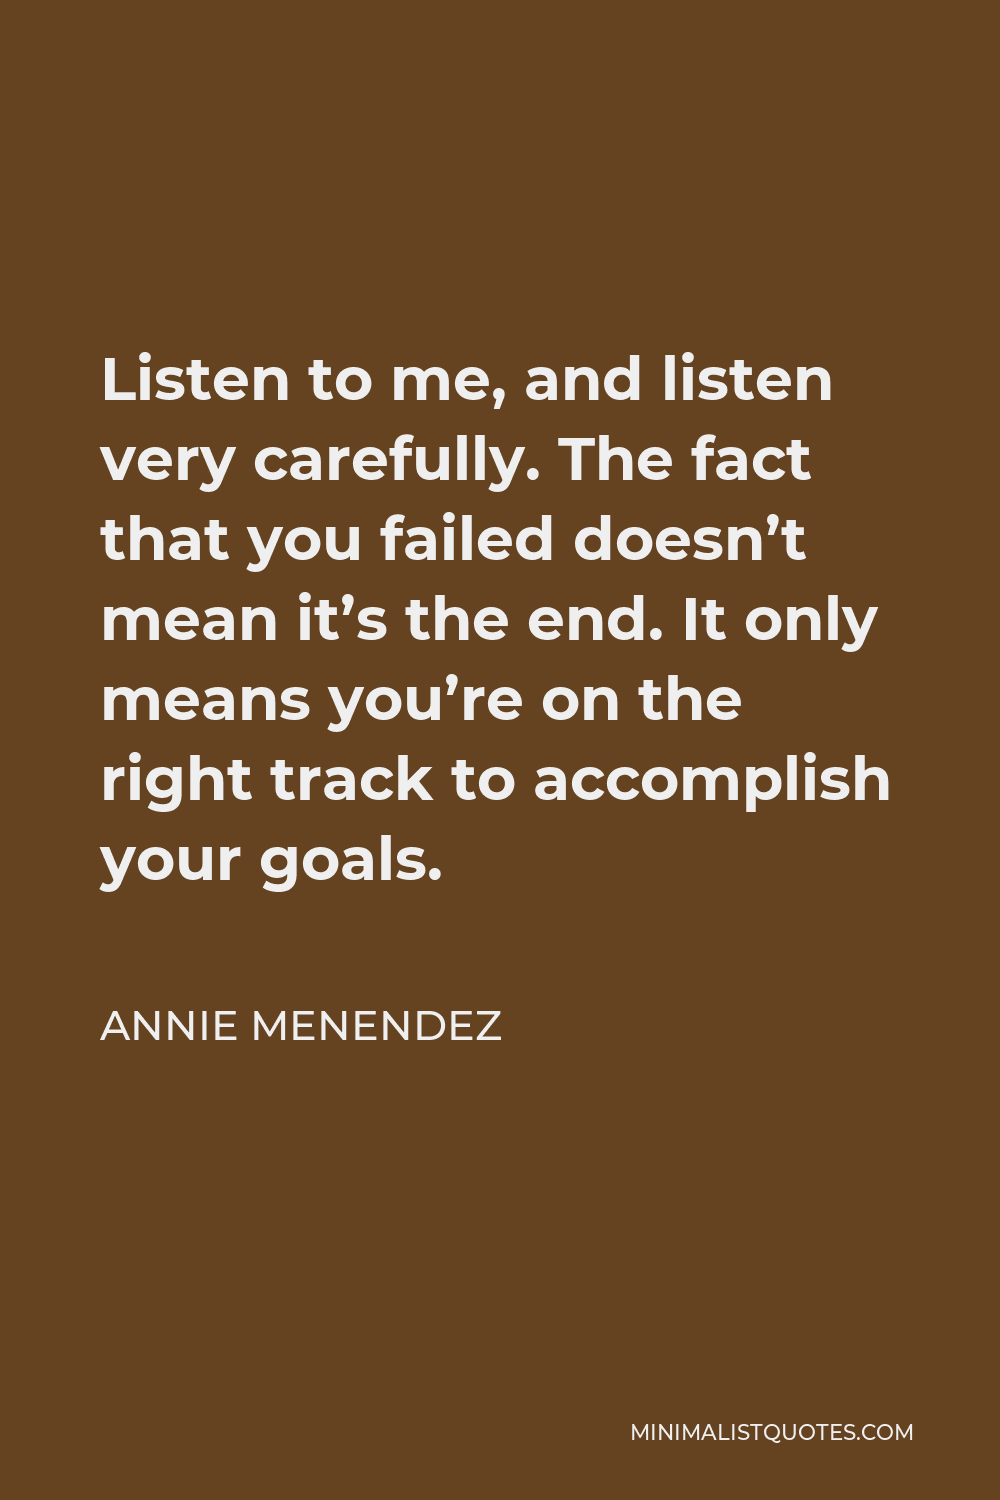 Annie Menendez Quote - Listen to me, and listen very carefully. The fact that you failed doesn’t mean it’s the end. It only means you’re on the right track to accomplish your goals.